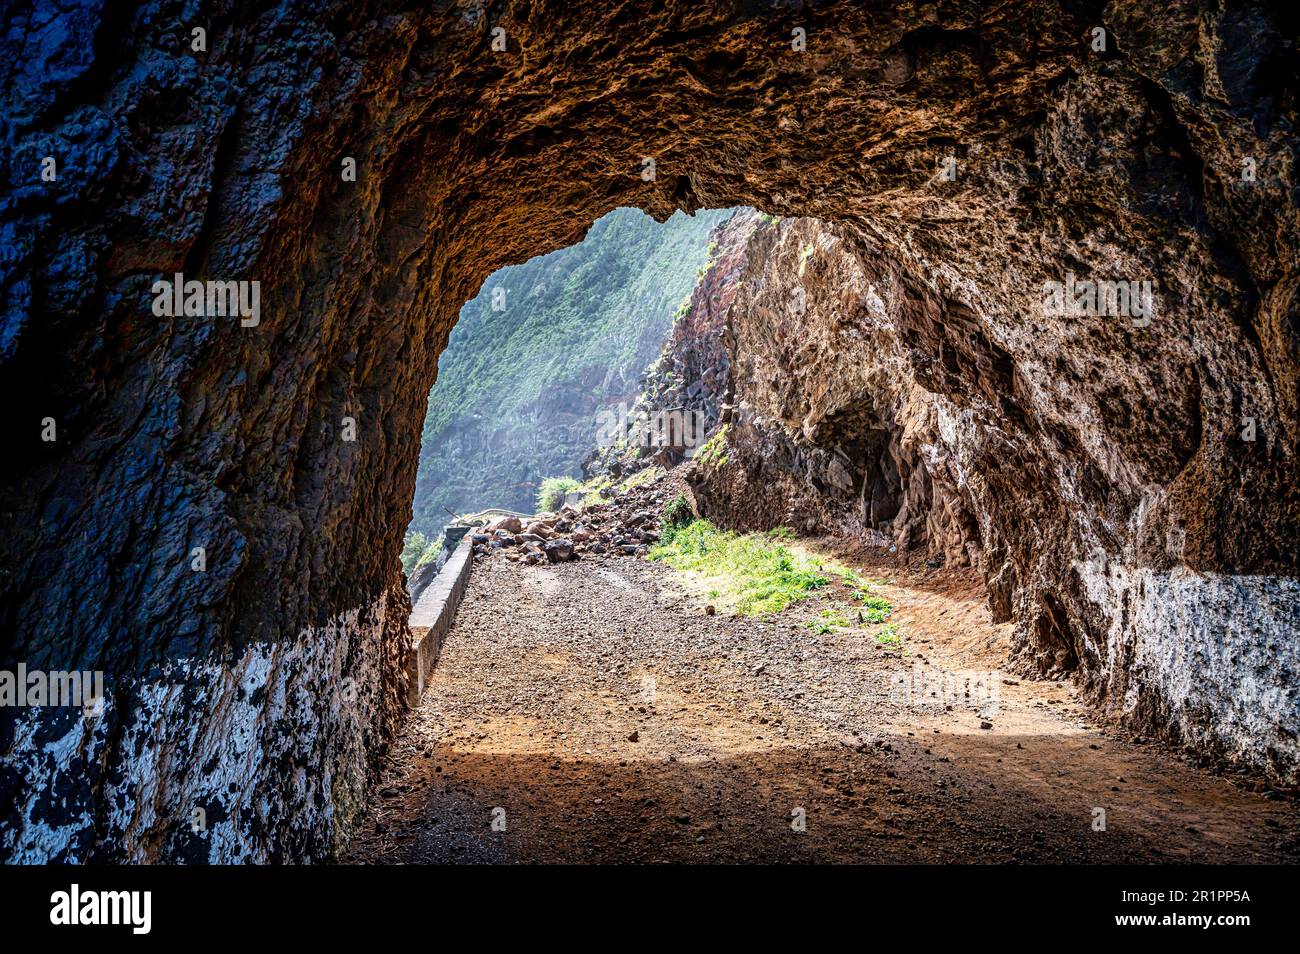 An imposing cave in the rugged mountainscape Stock Photo